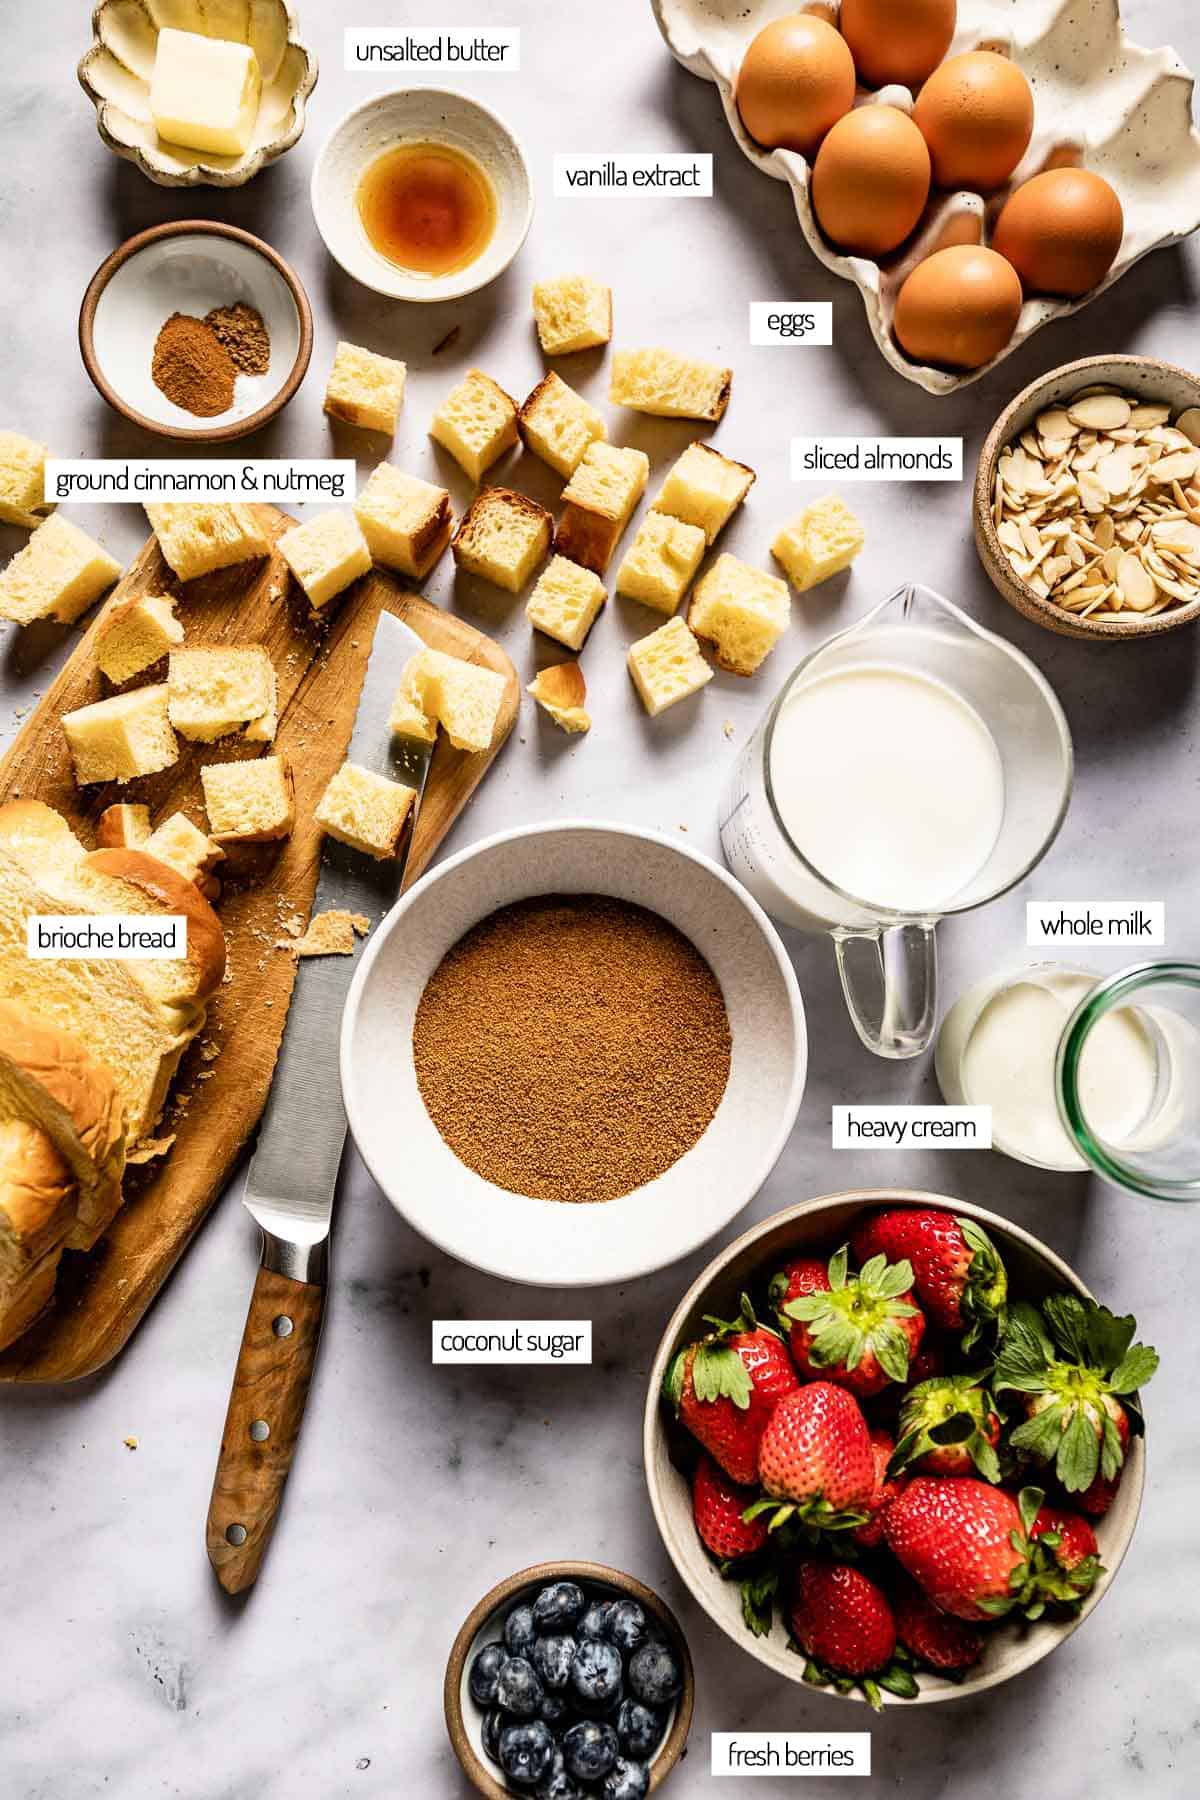 Ingredients for a casserole made with brioche bread shown from the top view.